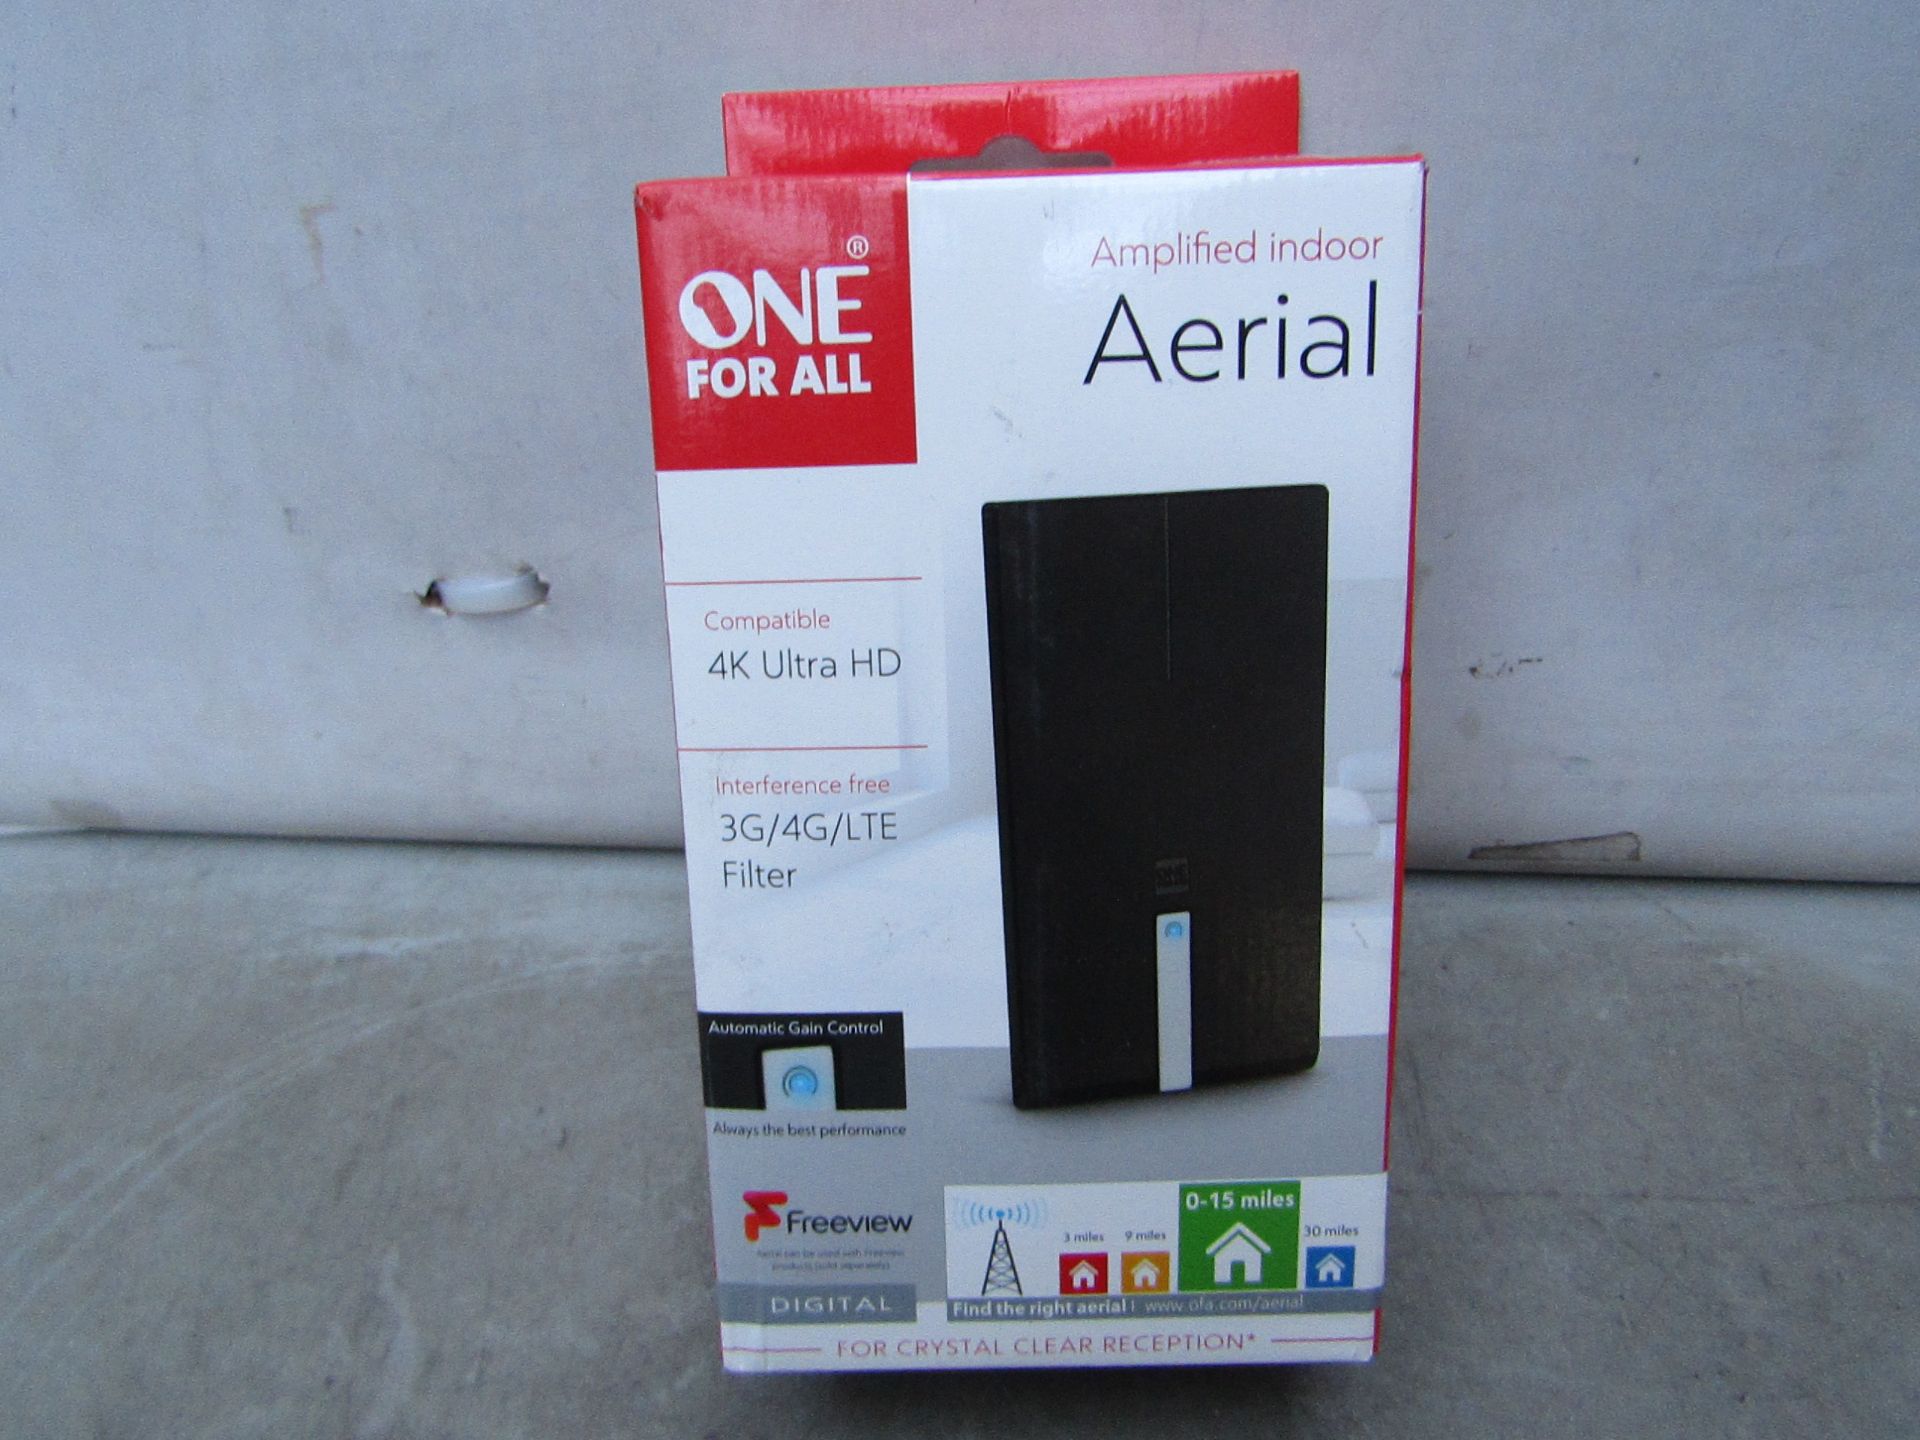 One For All Amplified Indoor Aerial - Unchecked & Boxed